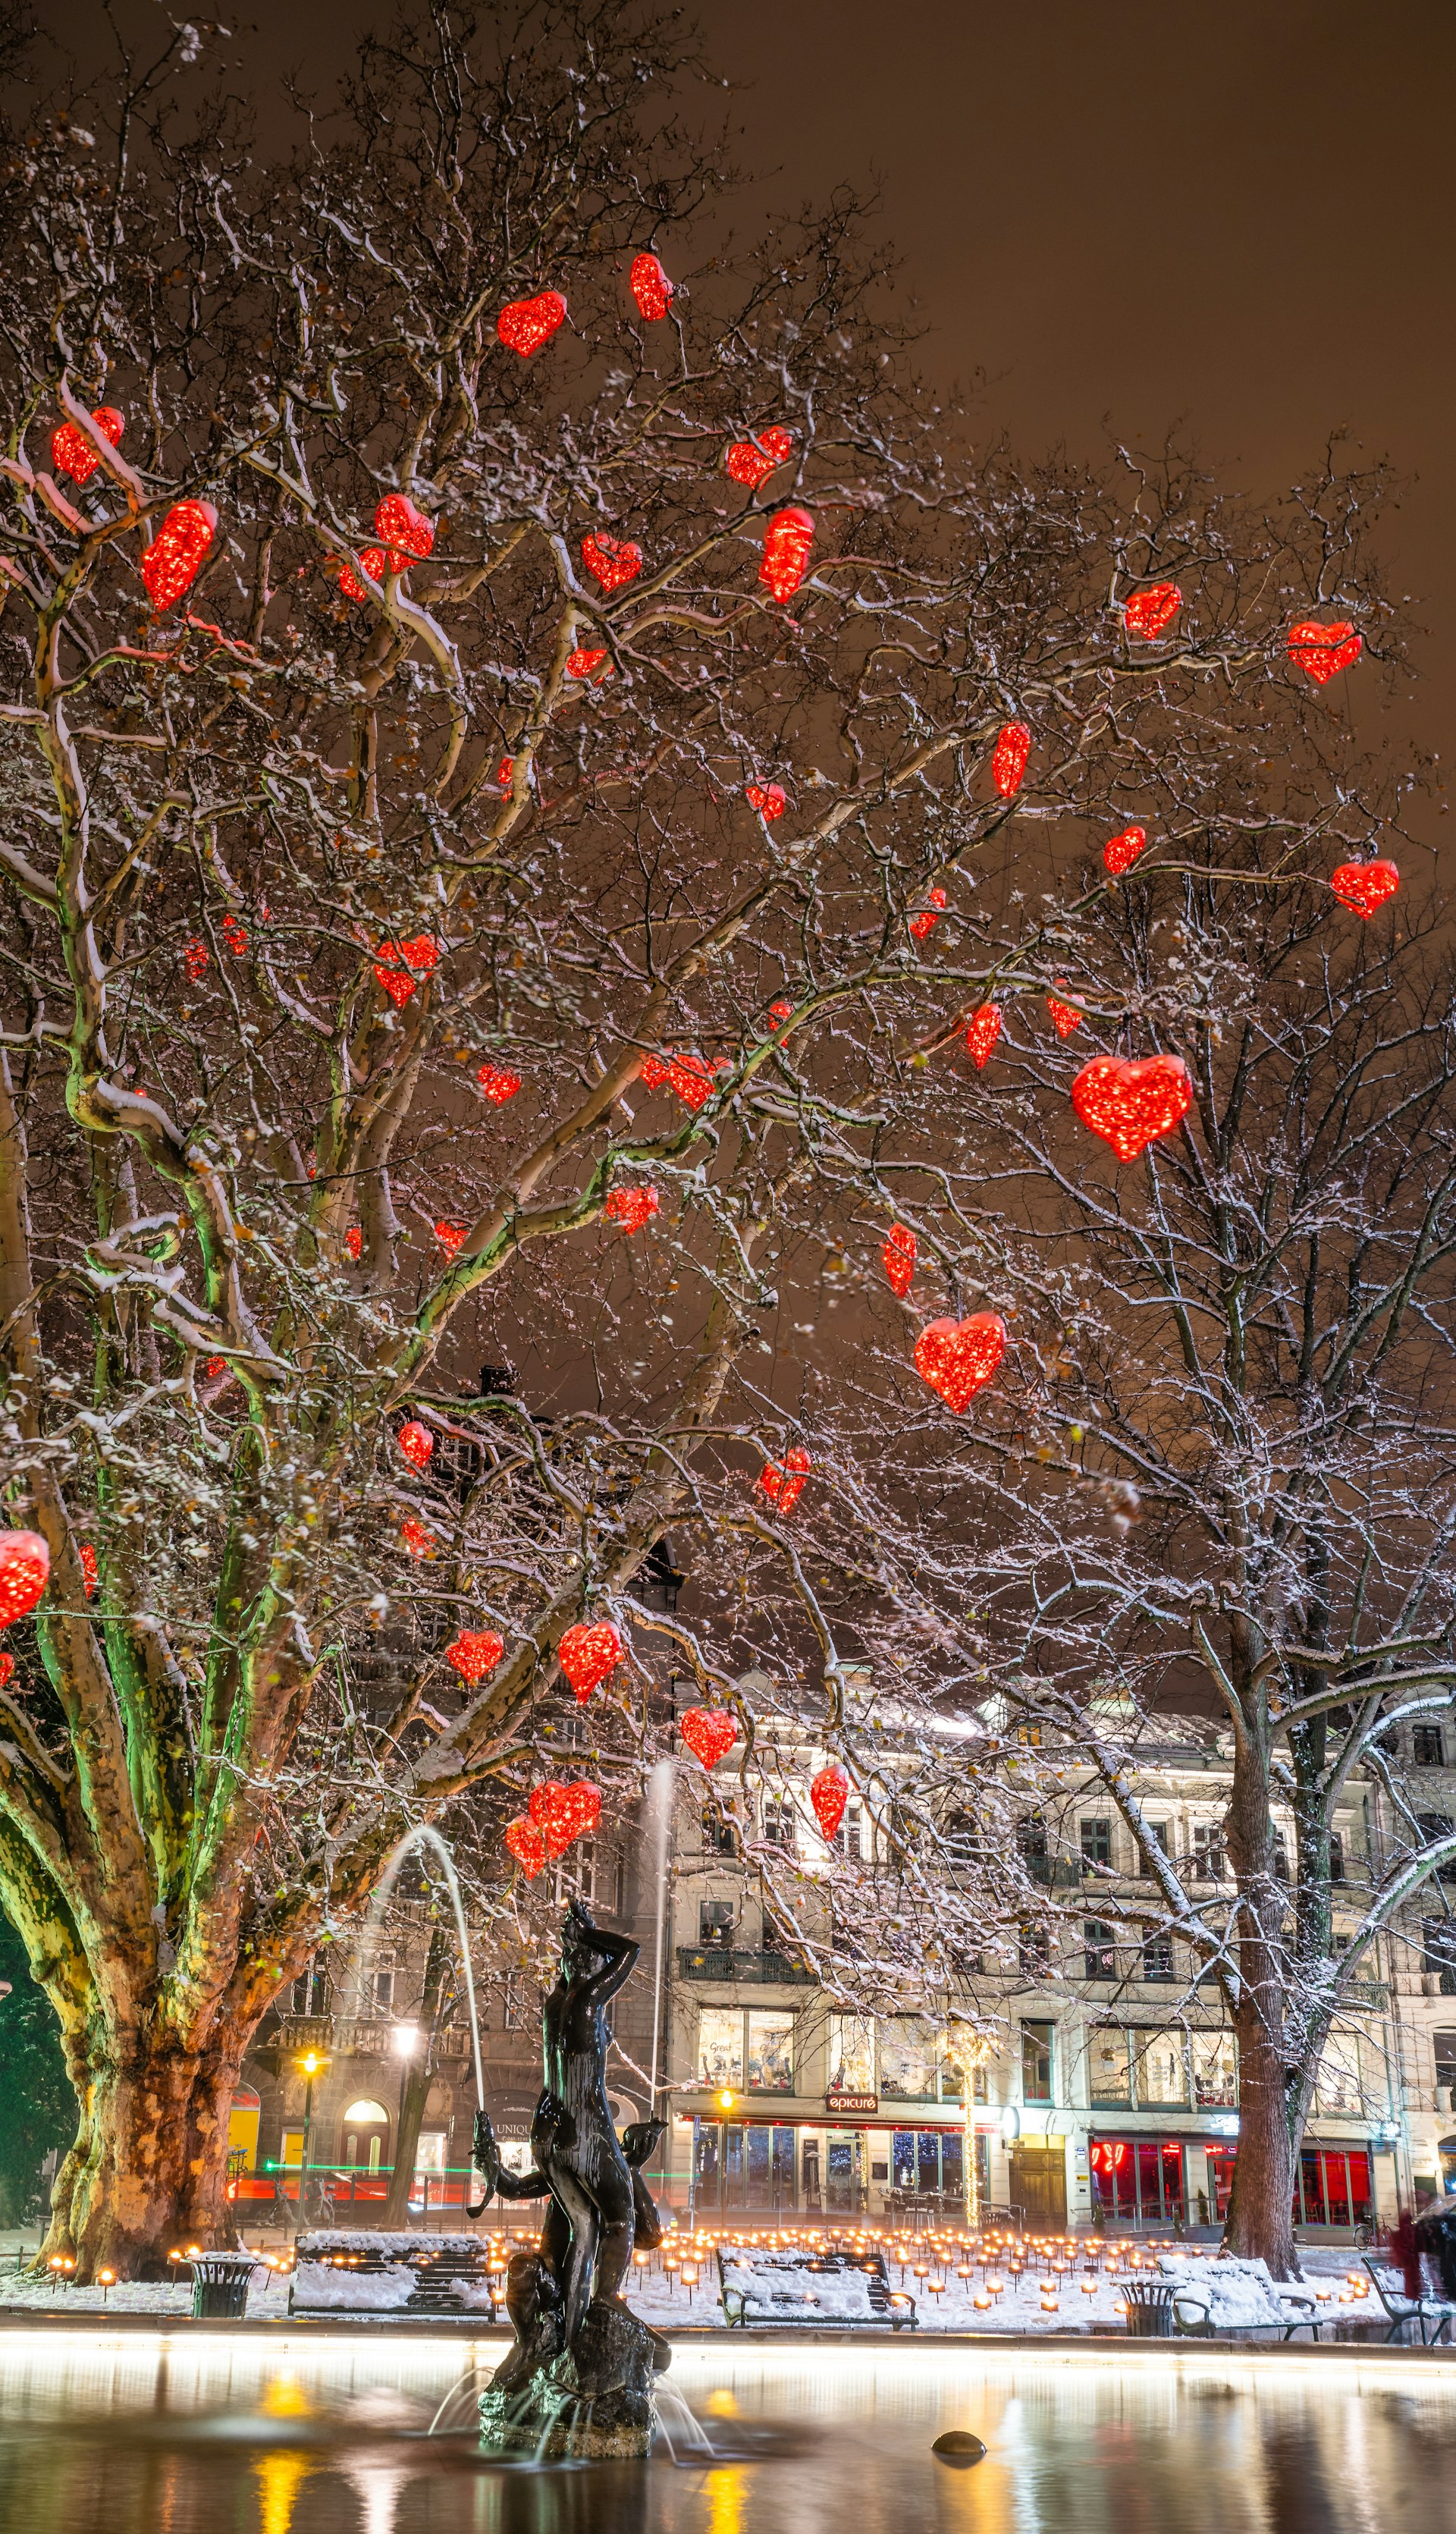 The tree of love filled with red hearts stands at Gusav Adolf's Sq in Malmöat christmas time